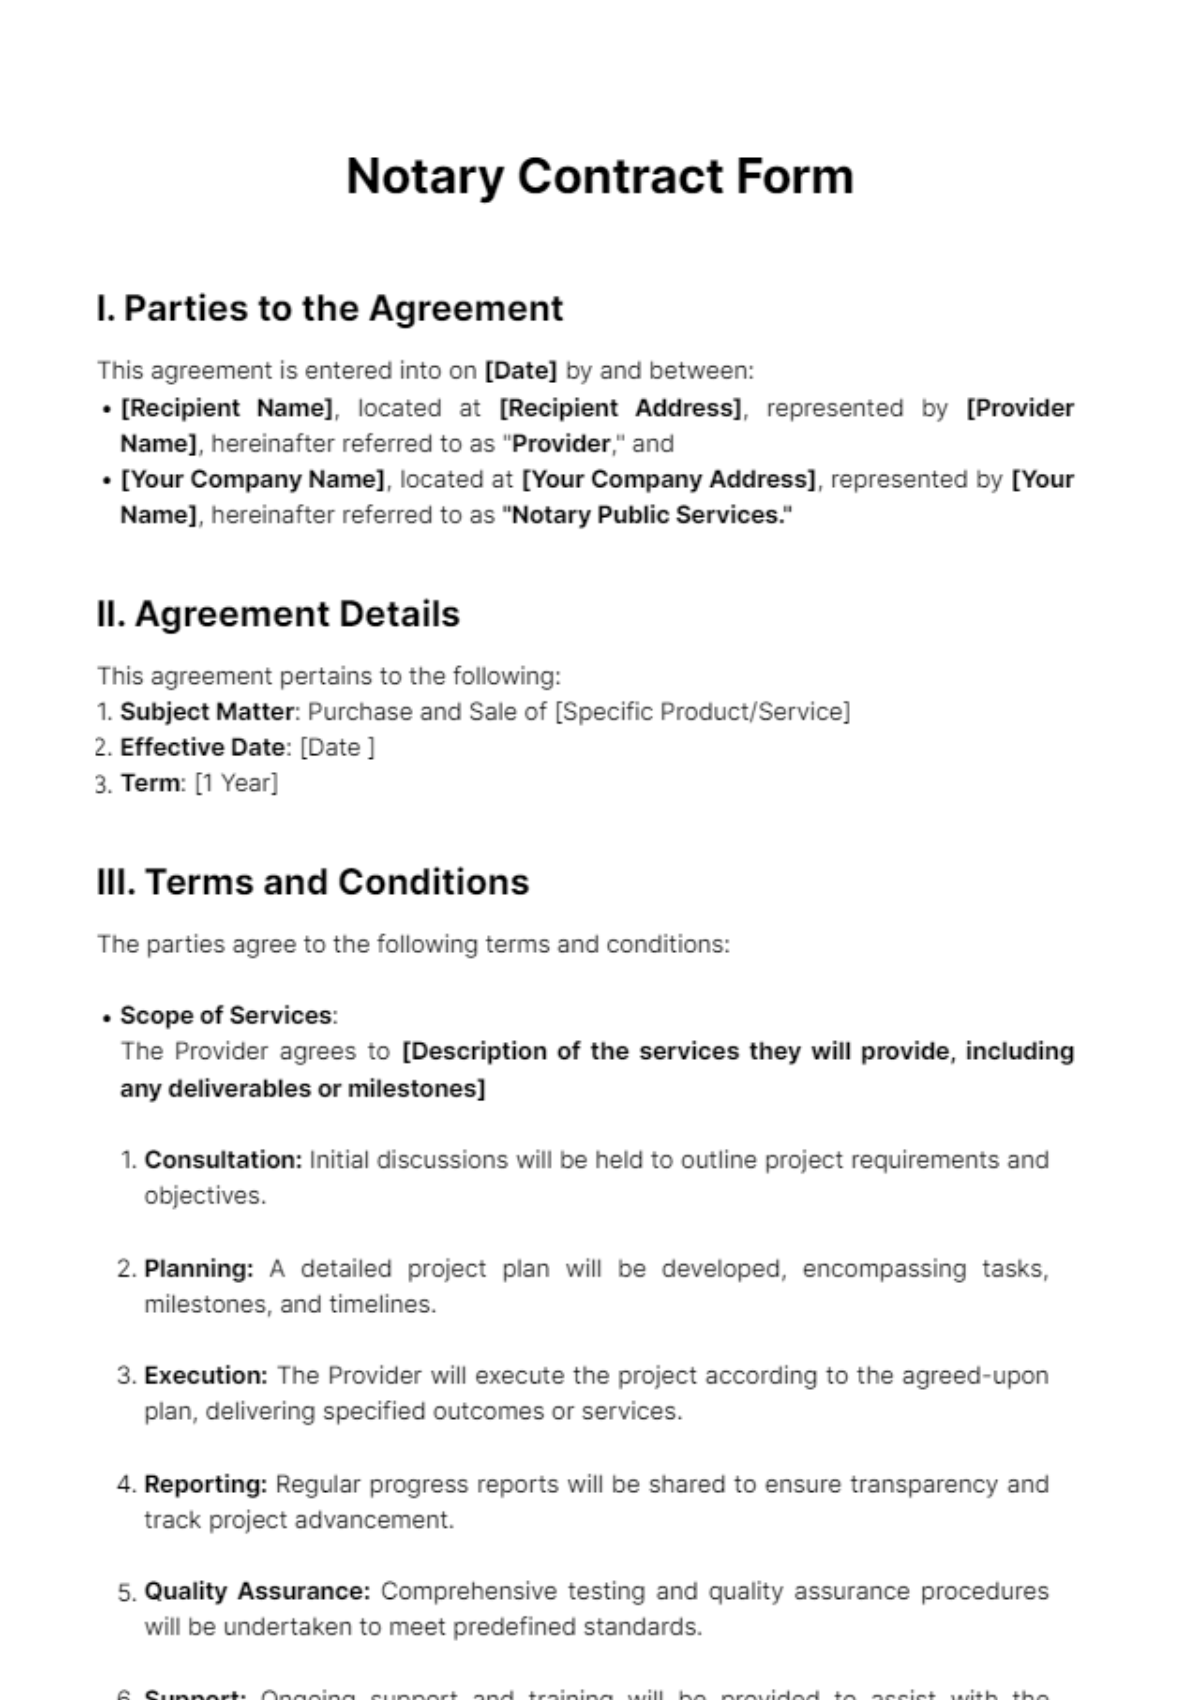 Notary Contract Form Template